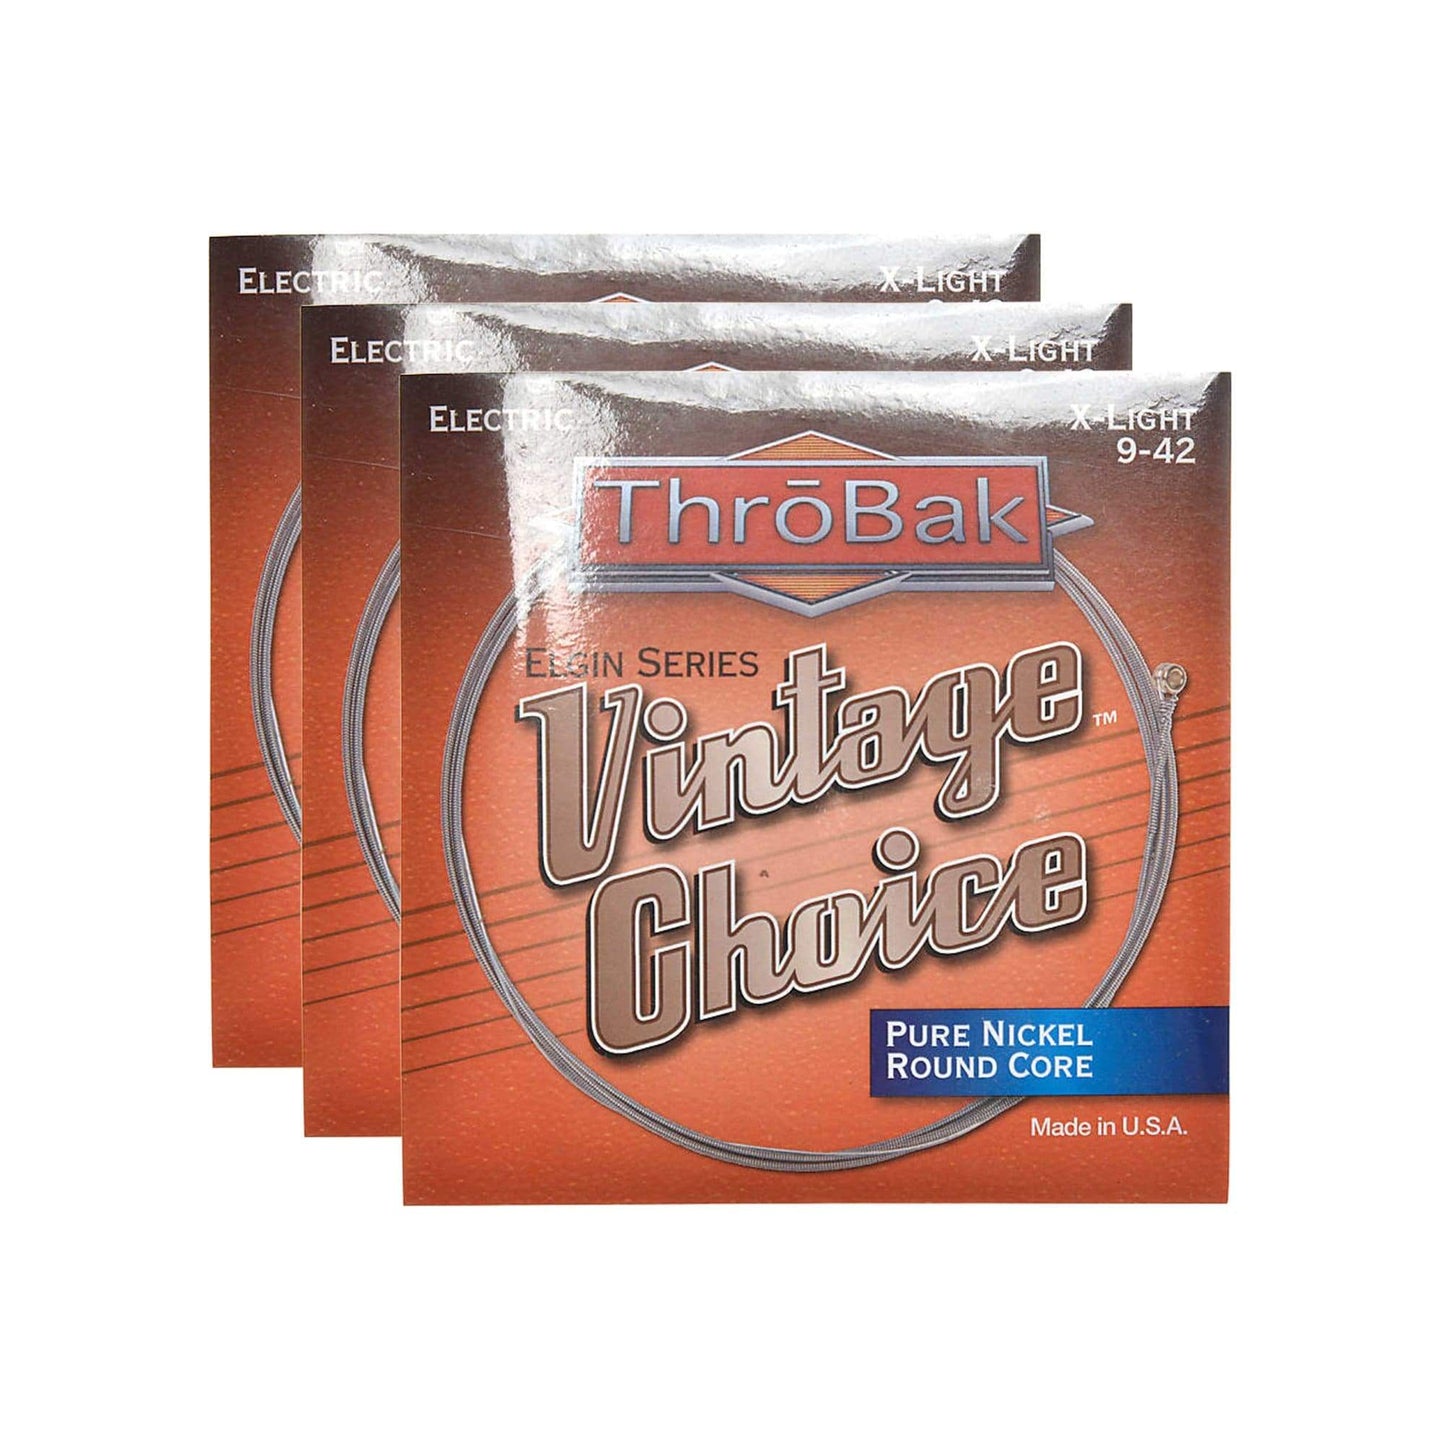 ThroBak Round Wound Pure Nickel Round Core X-Light Electric String Set (9-42) 3 Pack Bundle Accessories / Strings / Guitar Strings